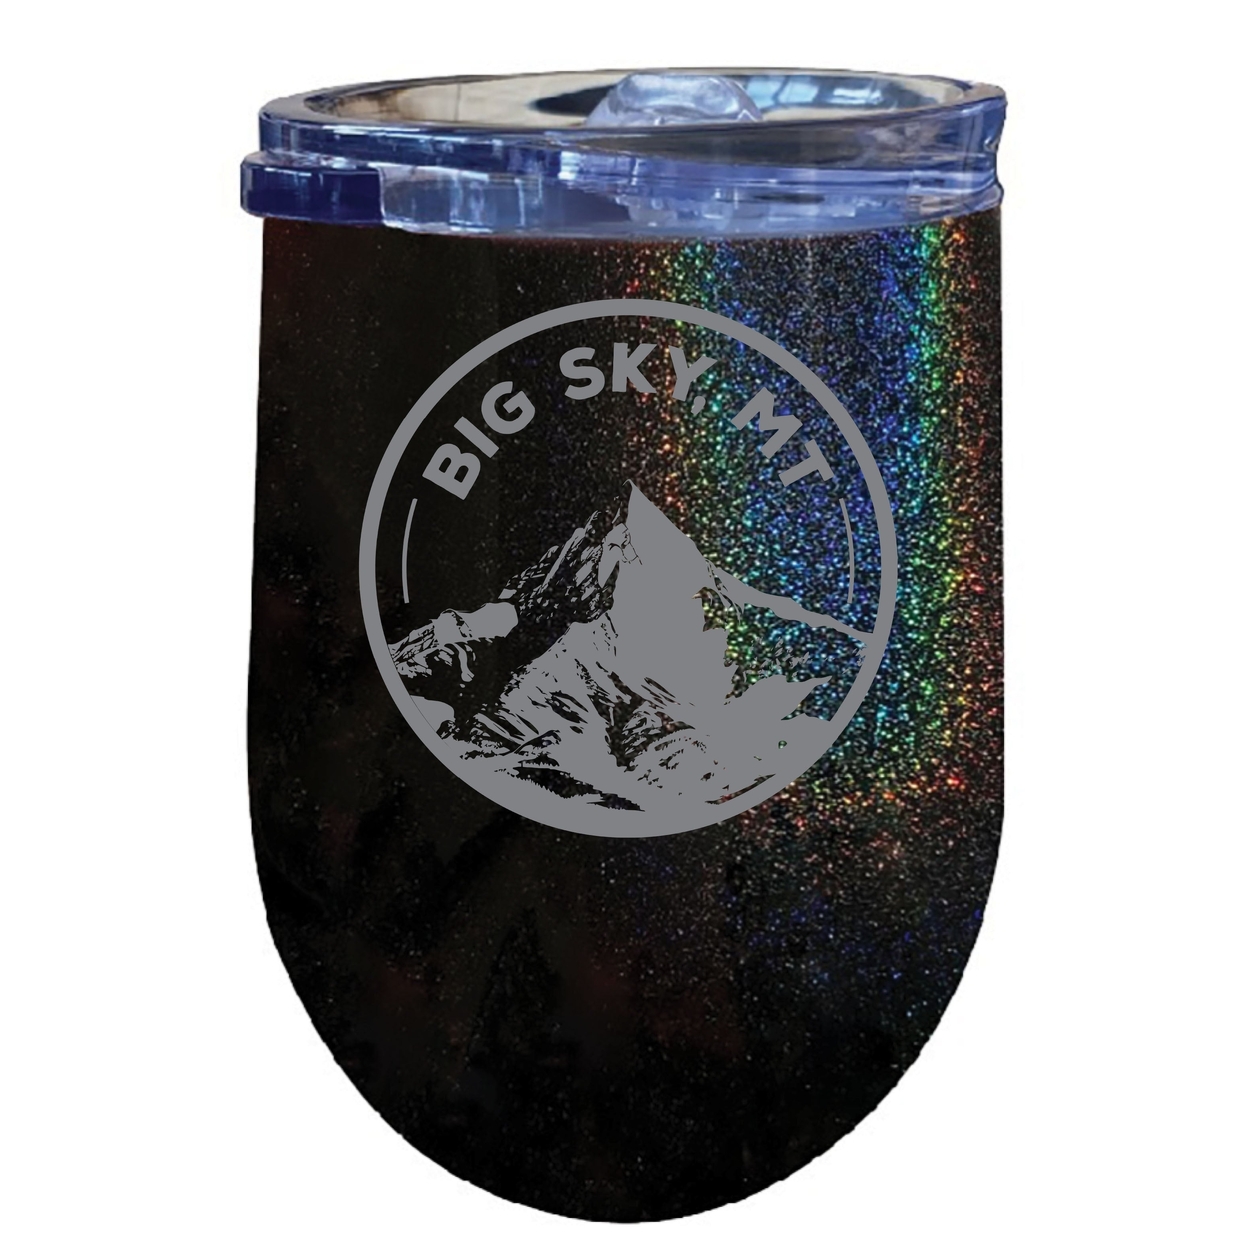 Big Sky Montana Souvenir 12 Oz Engraved Insulated Wine Stainless Steel Tumbler - Coral,,4-Pack